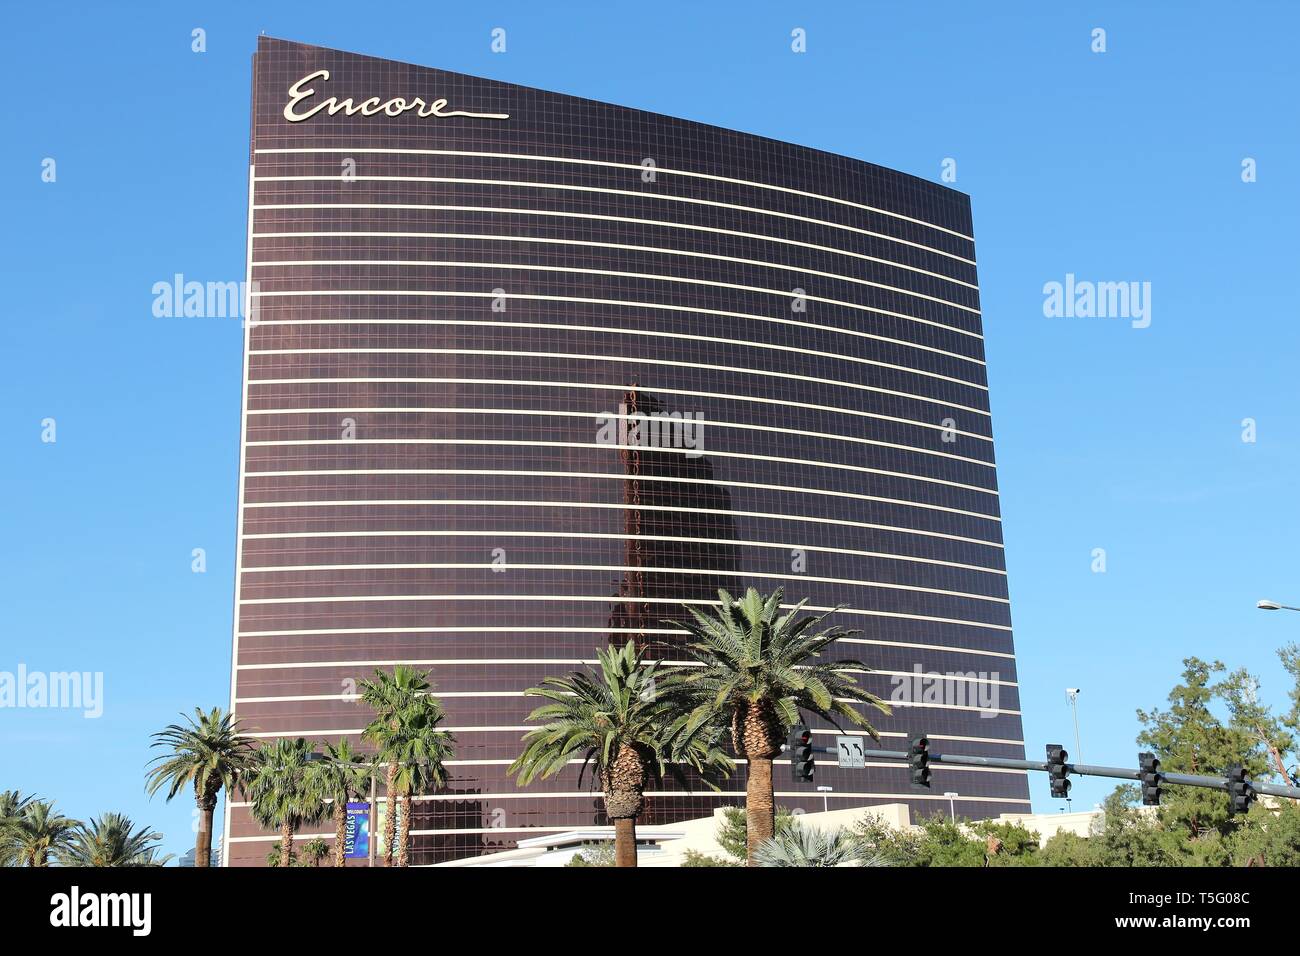 LAS VEGAS, USA - APRIL 14, 2014: Encore resort in Las Vegas. It is one of 20 largest hotels in the world with 4,750 rooms (together with adjacent Wynn Stock Photo